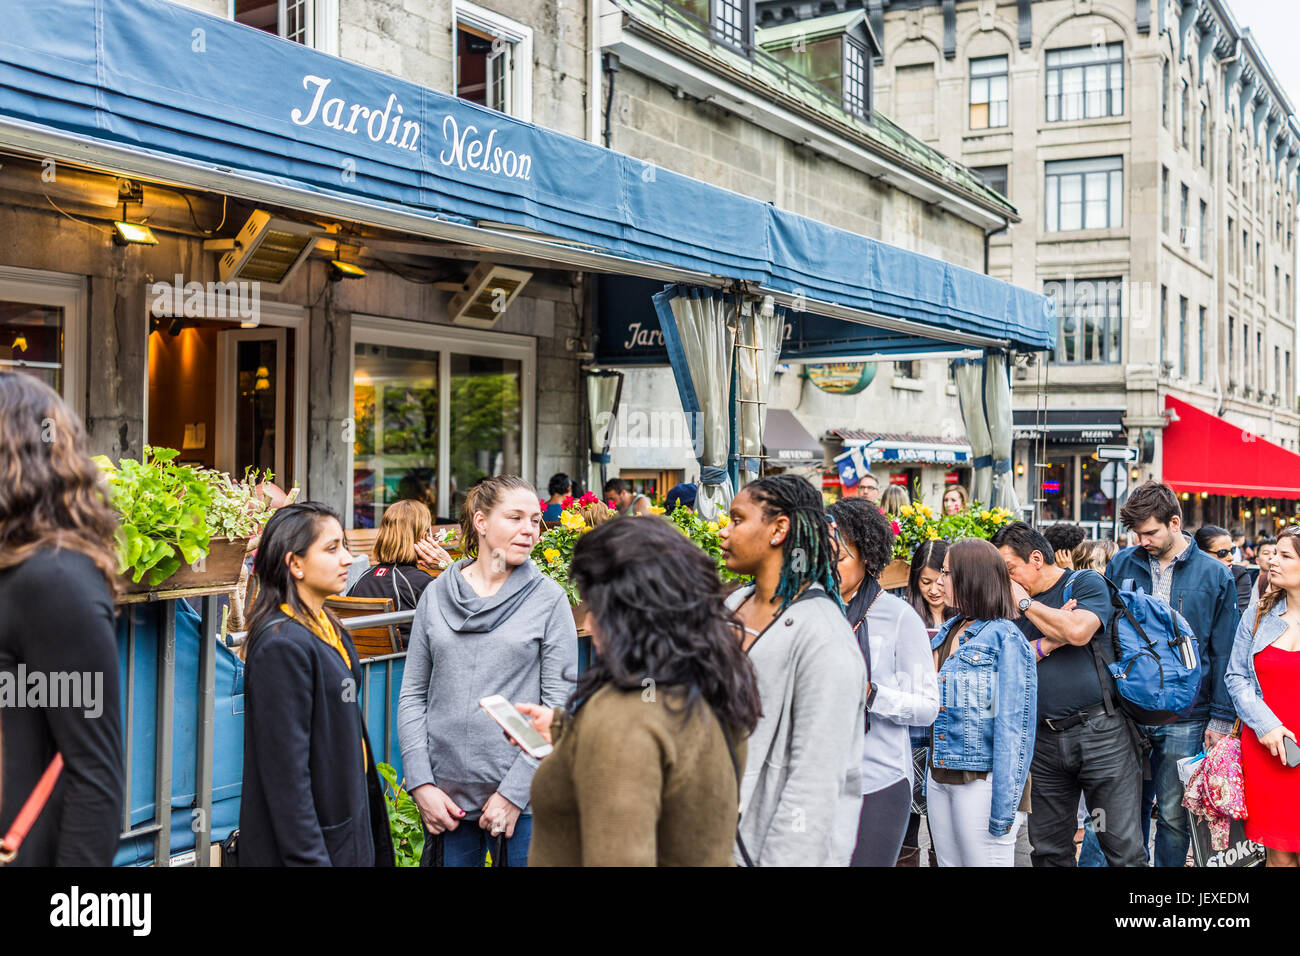 Montreal, Canada - May 27, 2017: Old town area Jacques Cartier square with people waiting in line queue outside restaurant called Jardin Nelson during Stock Photo